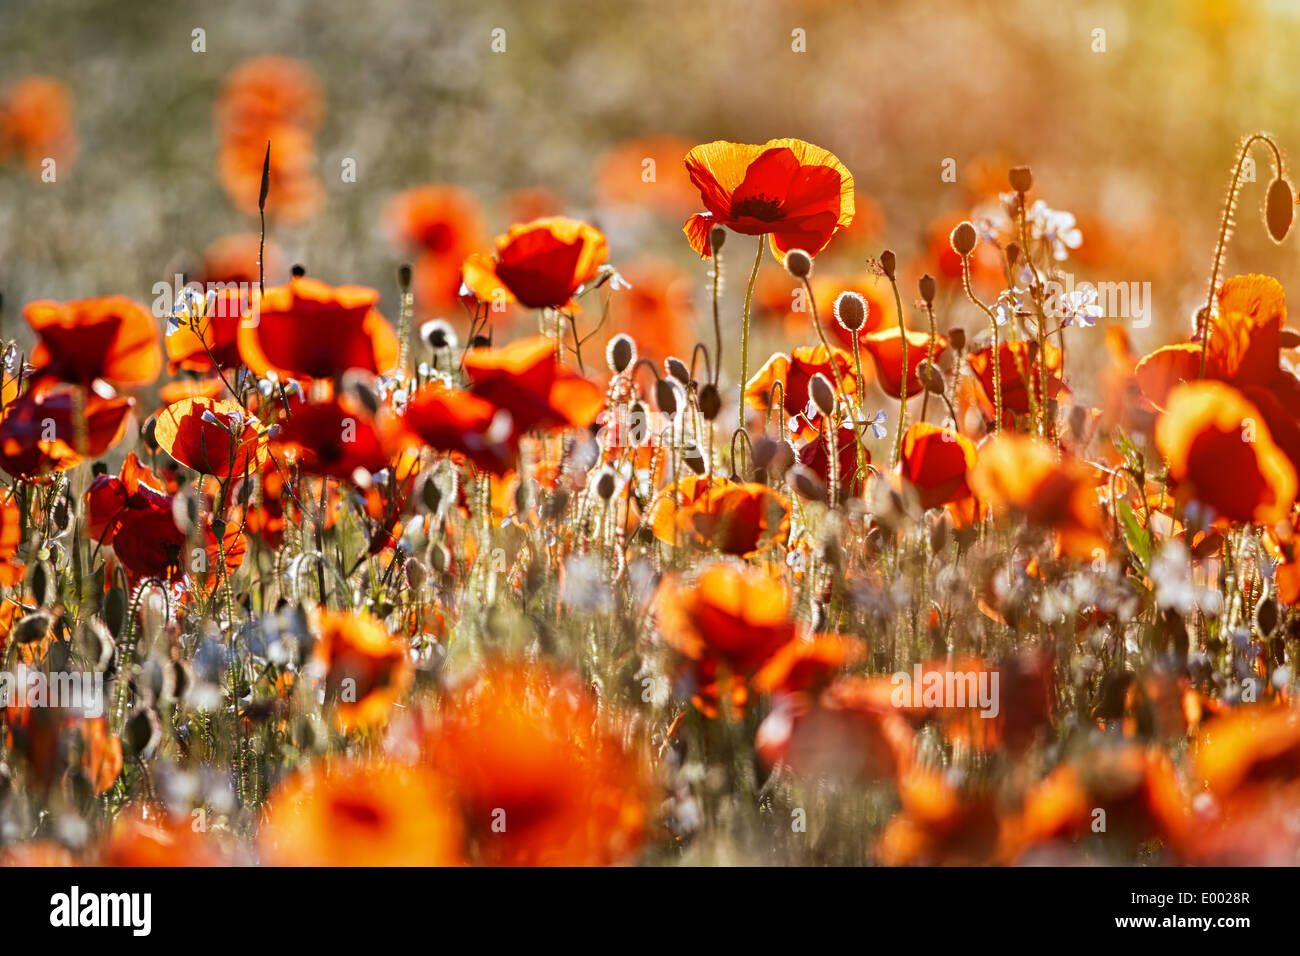 A field of poppies in the British countryside Stock Photo